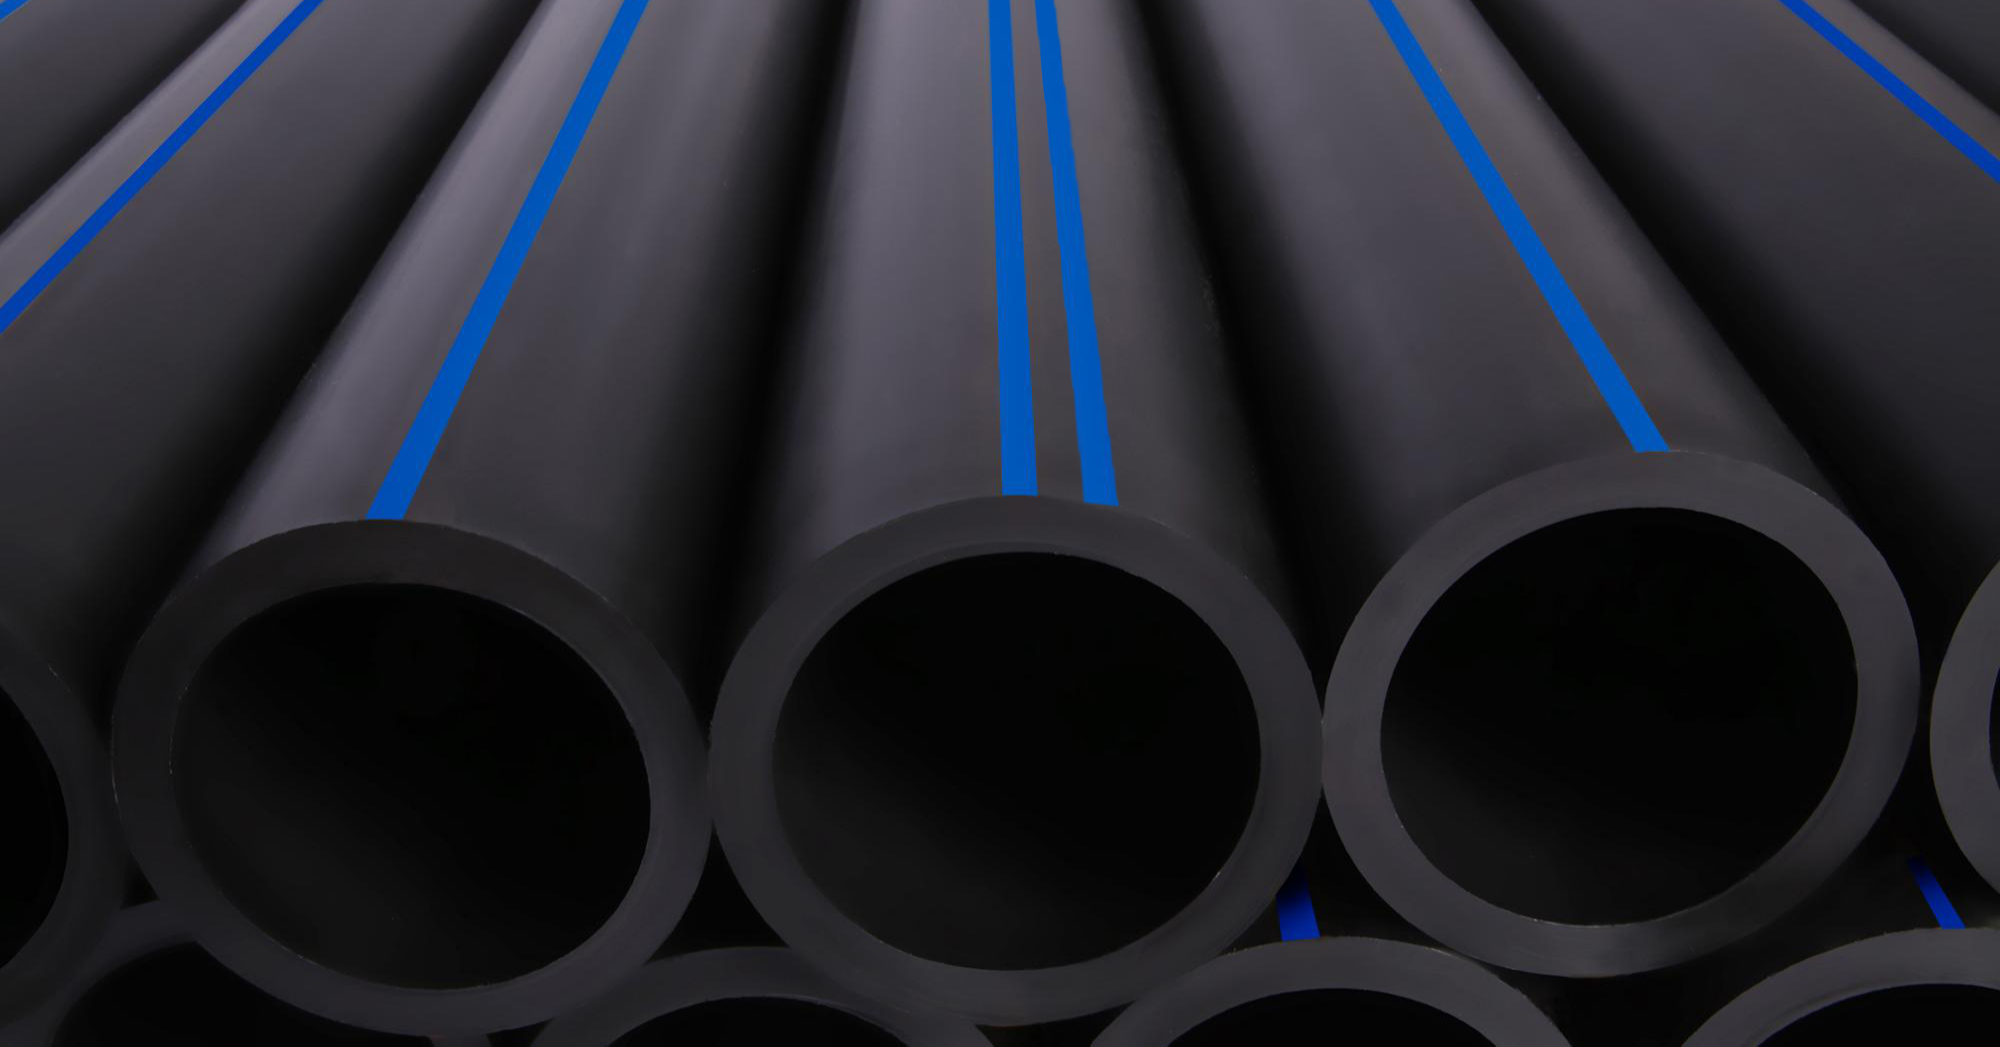 HDPE Pipe ASTM Standards Guide: 16 Common Standards